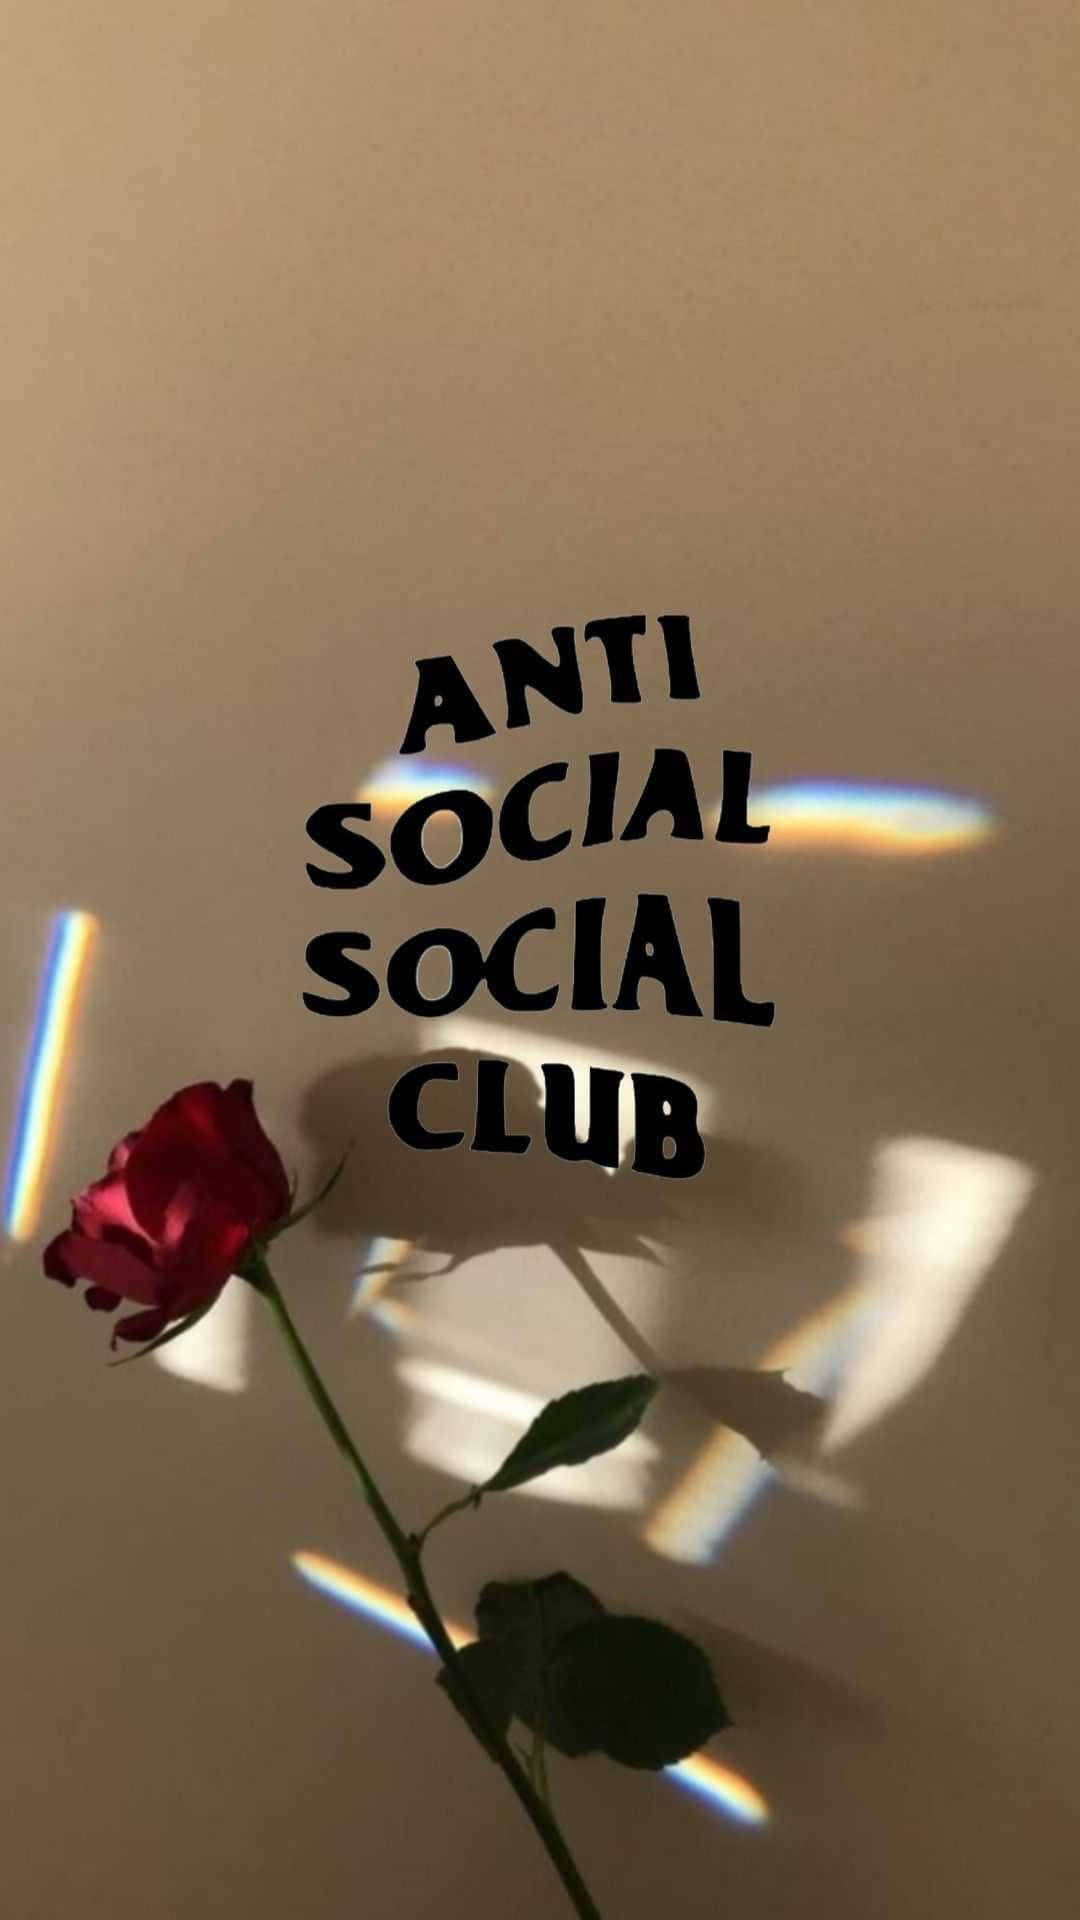 Red Rose And Anti Social Club Iphone Wallpaper